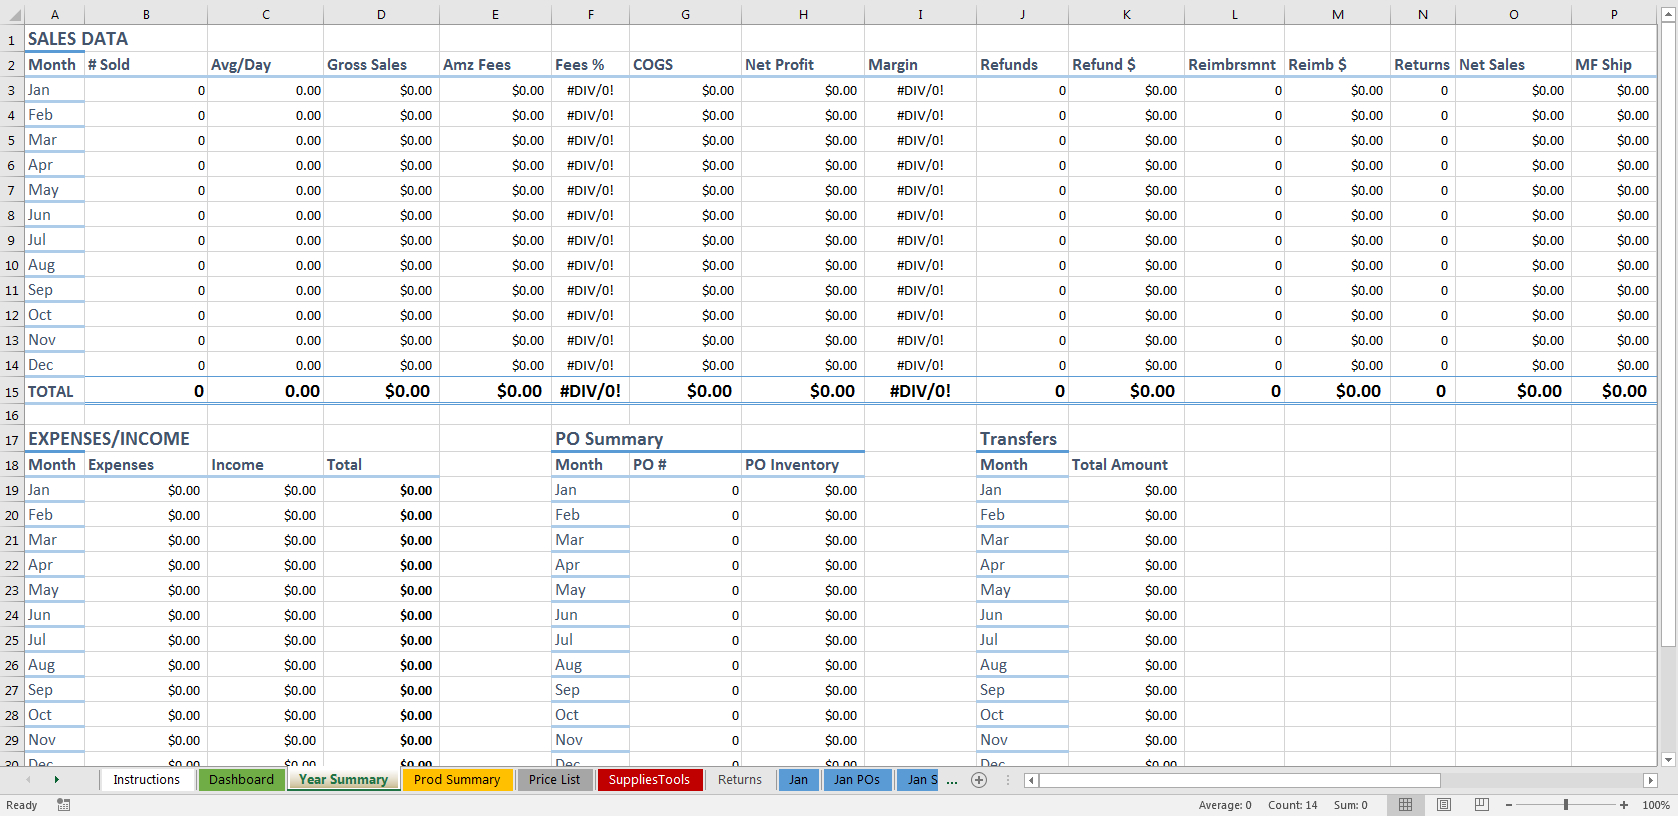 The Ultimate Amazon Fba Sales Spreadsheet V1 Intended For Amazon Fba Excel Spreadsheet